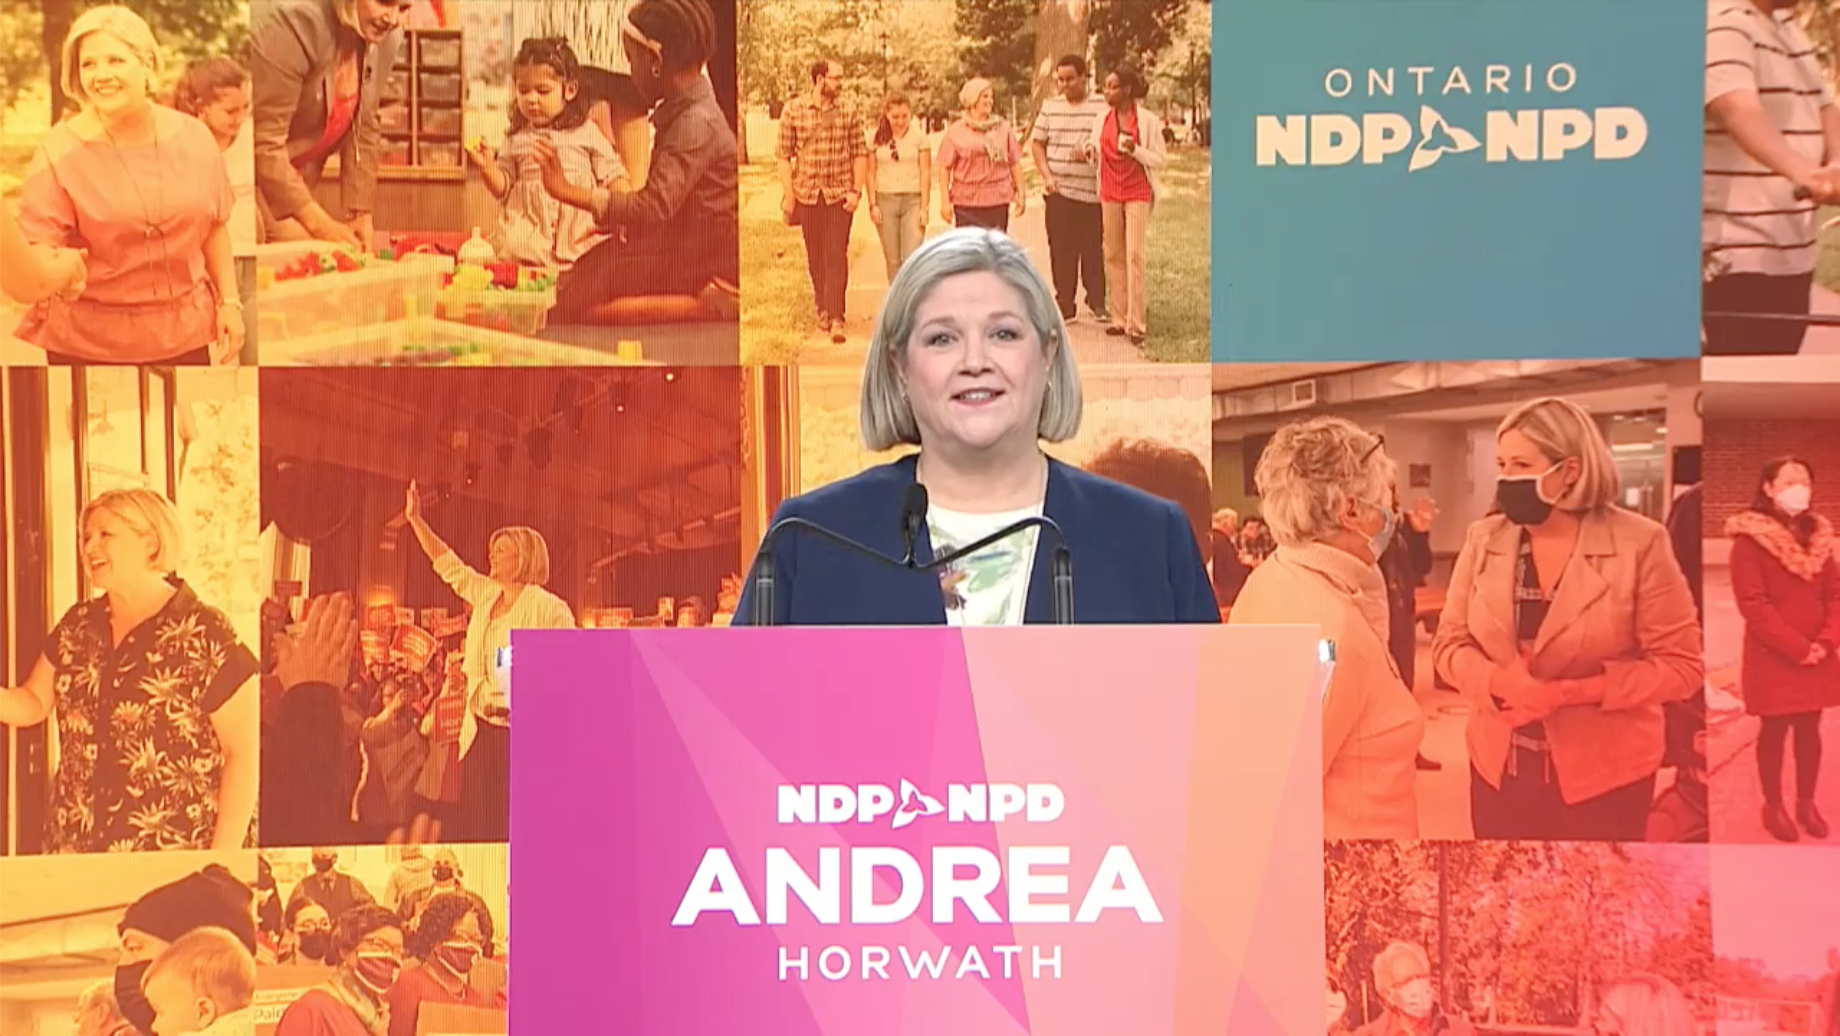 Horwath bashes Ford's, Del Duca's leadership as NDP upholds hers